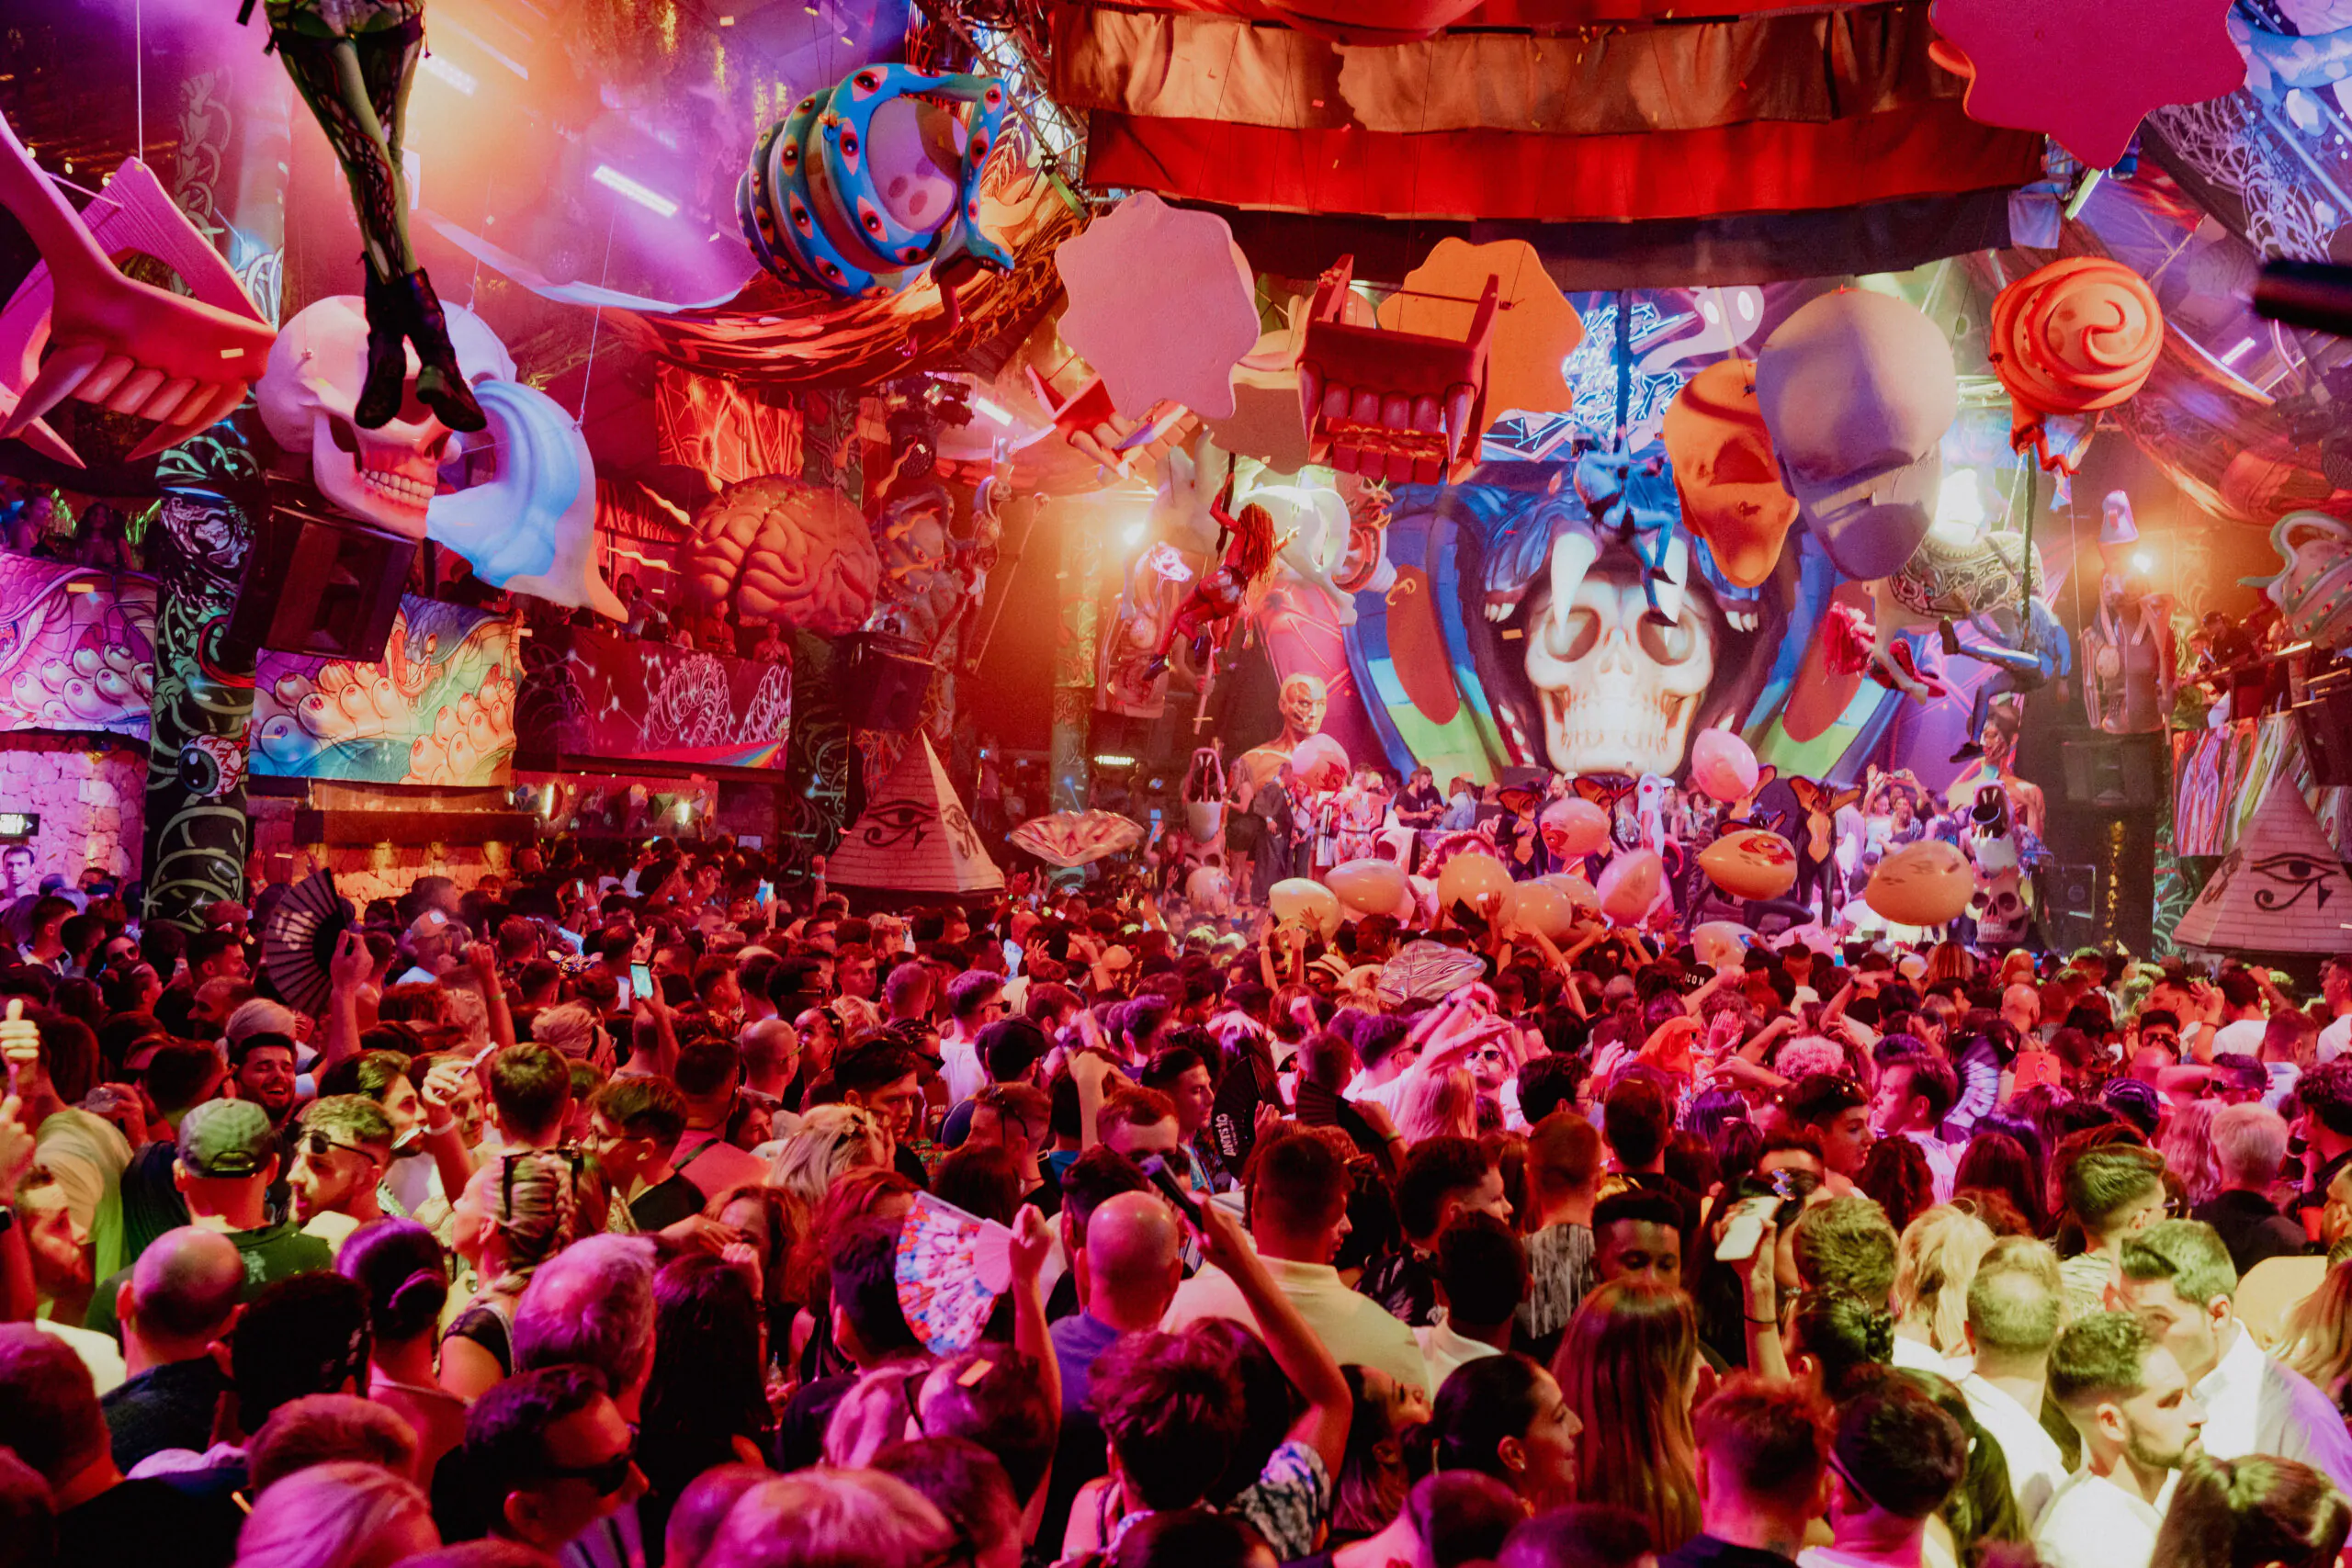 elrow: Dance with the Serpent tickets in Chicago at Radius on Sat, Dec 16,  2023 - 9:00PM